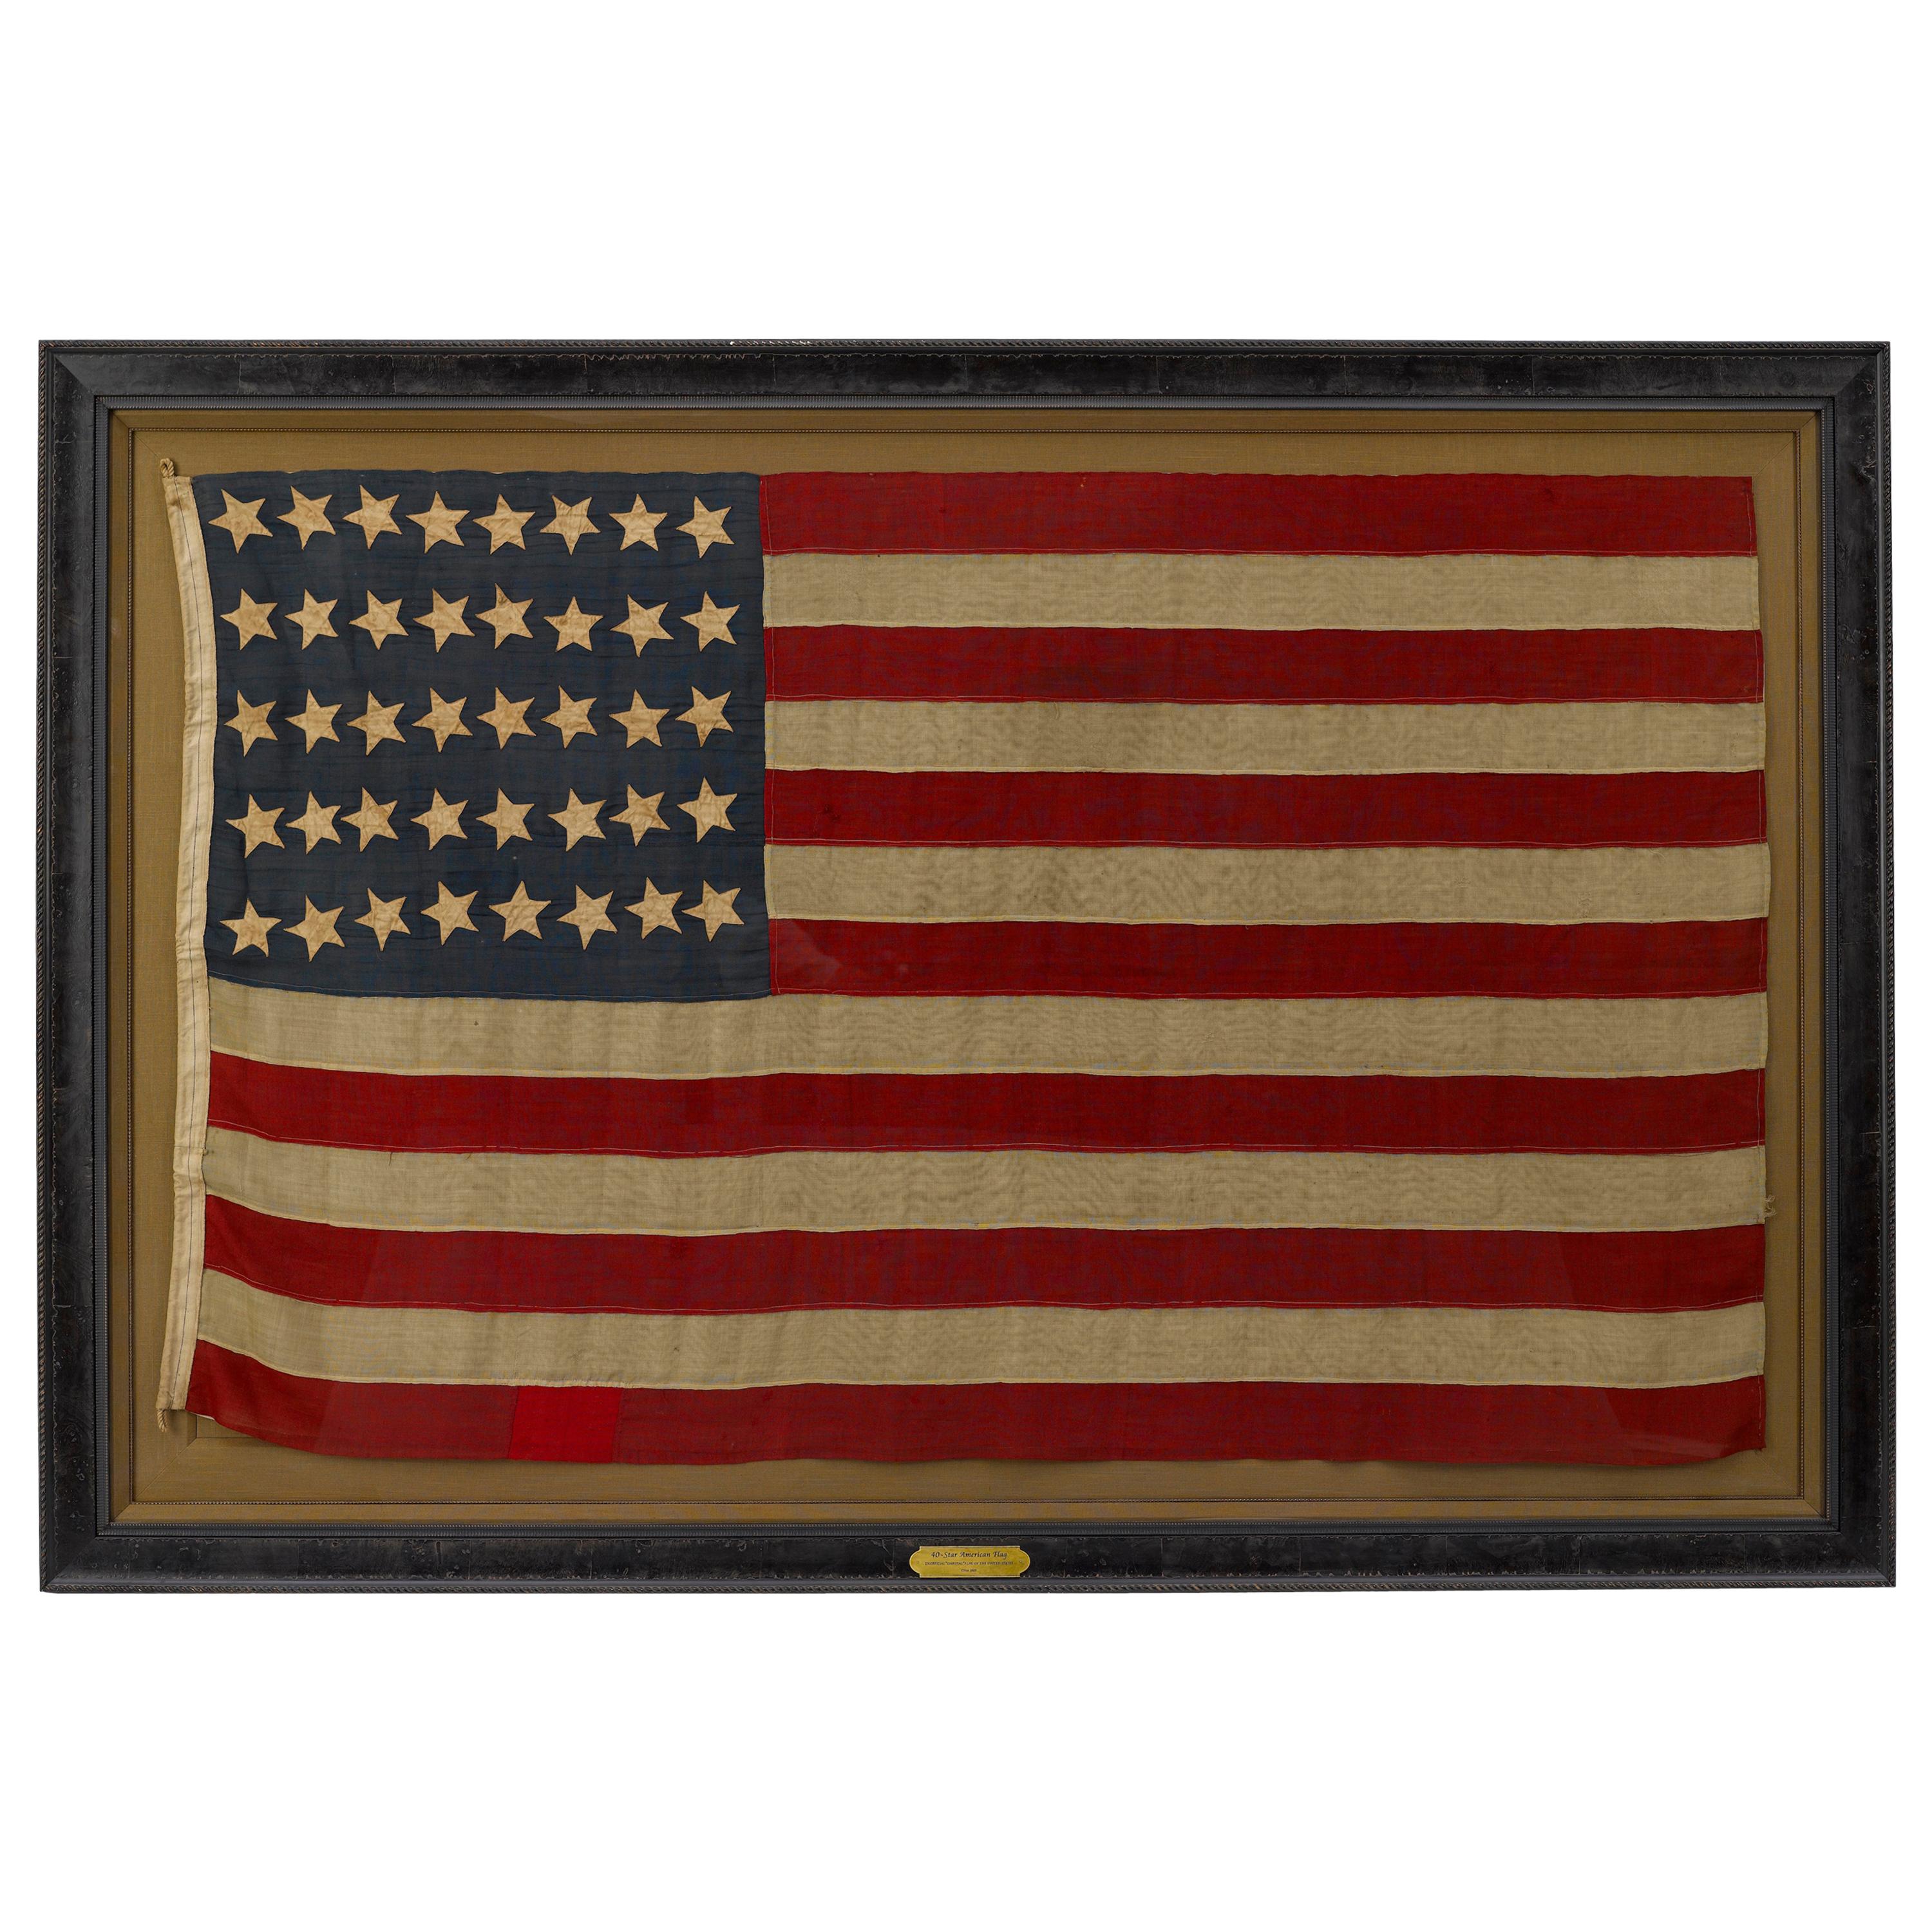 40-Star "Unofficial" Whimsical Star Pattern American Flag, circa 1889